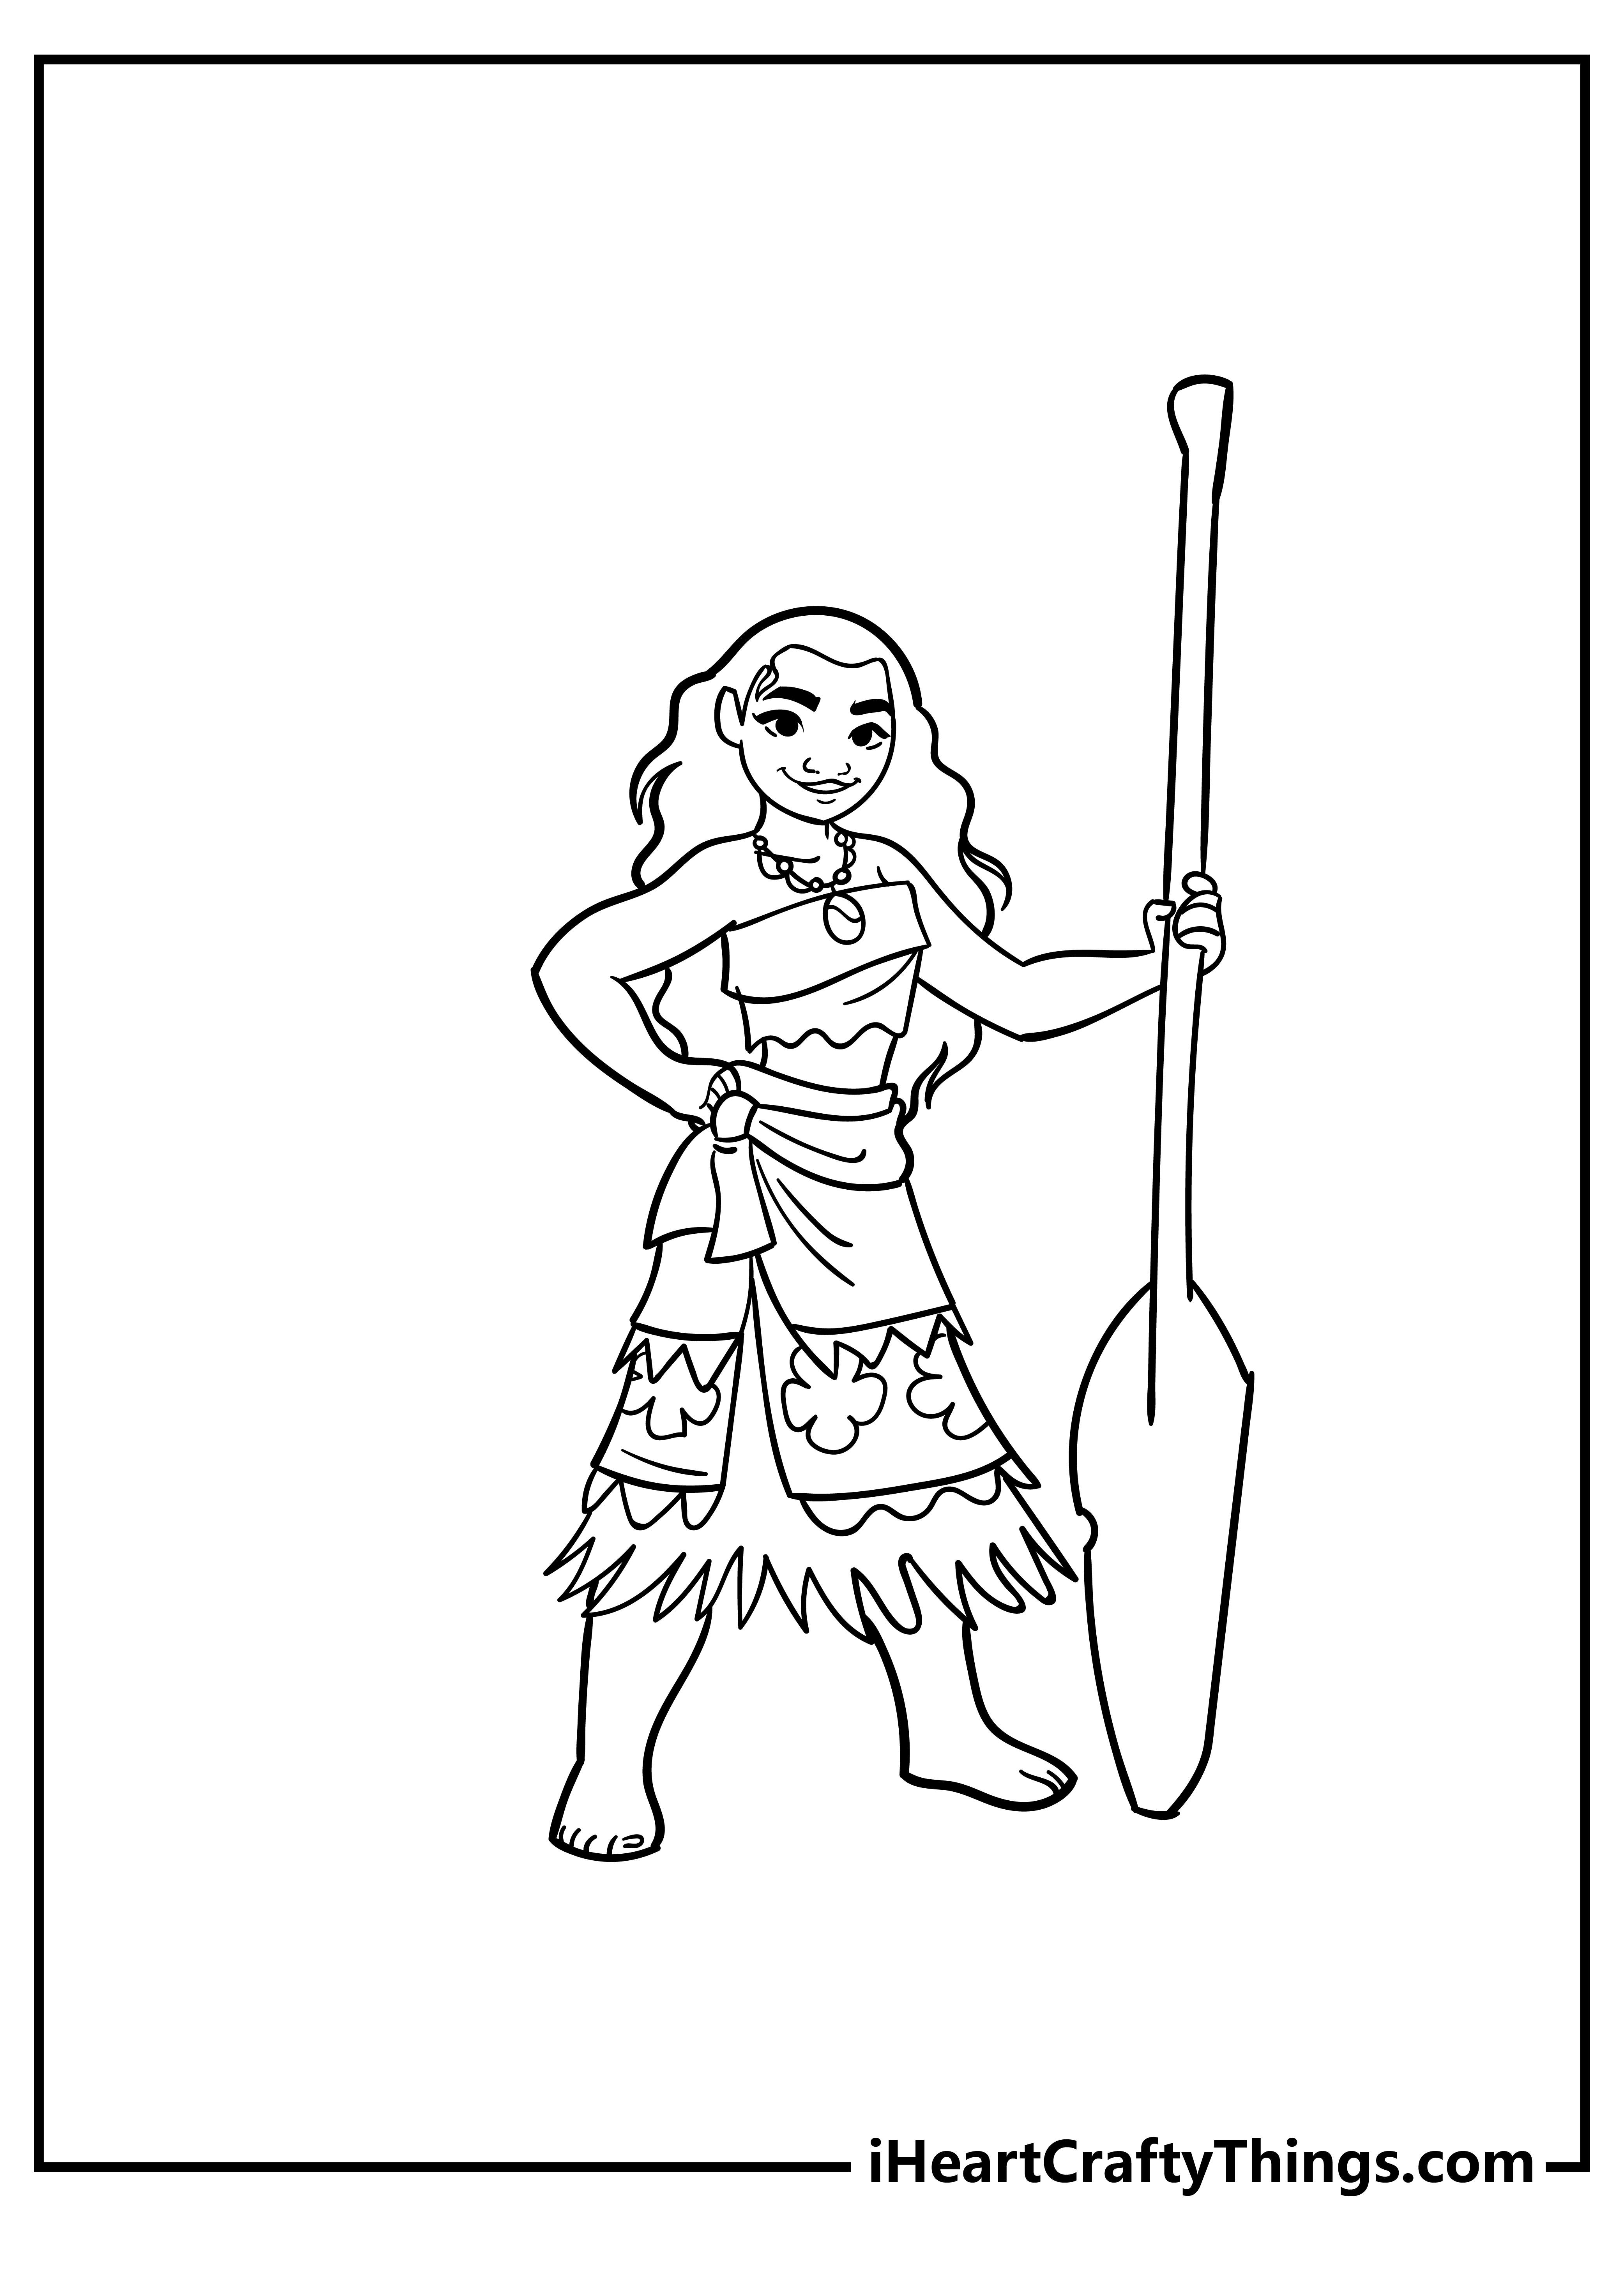 Printable Moana Coloring Pages Updated 21